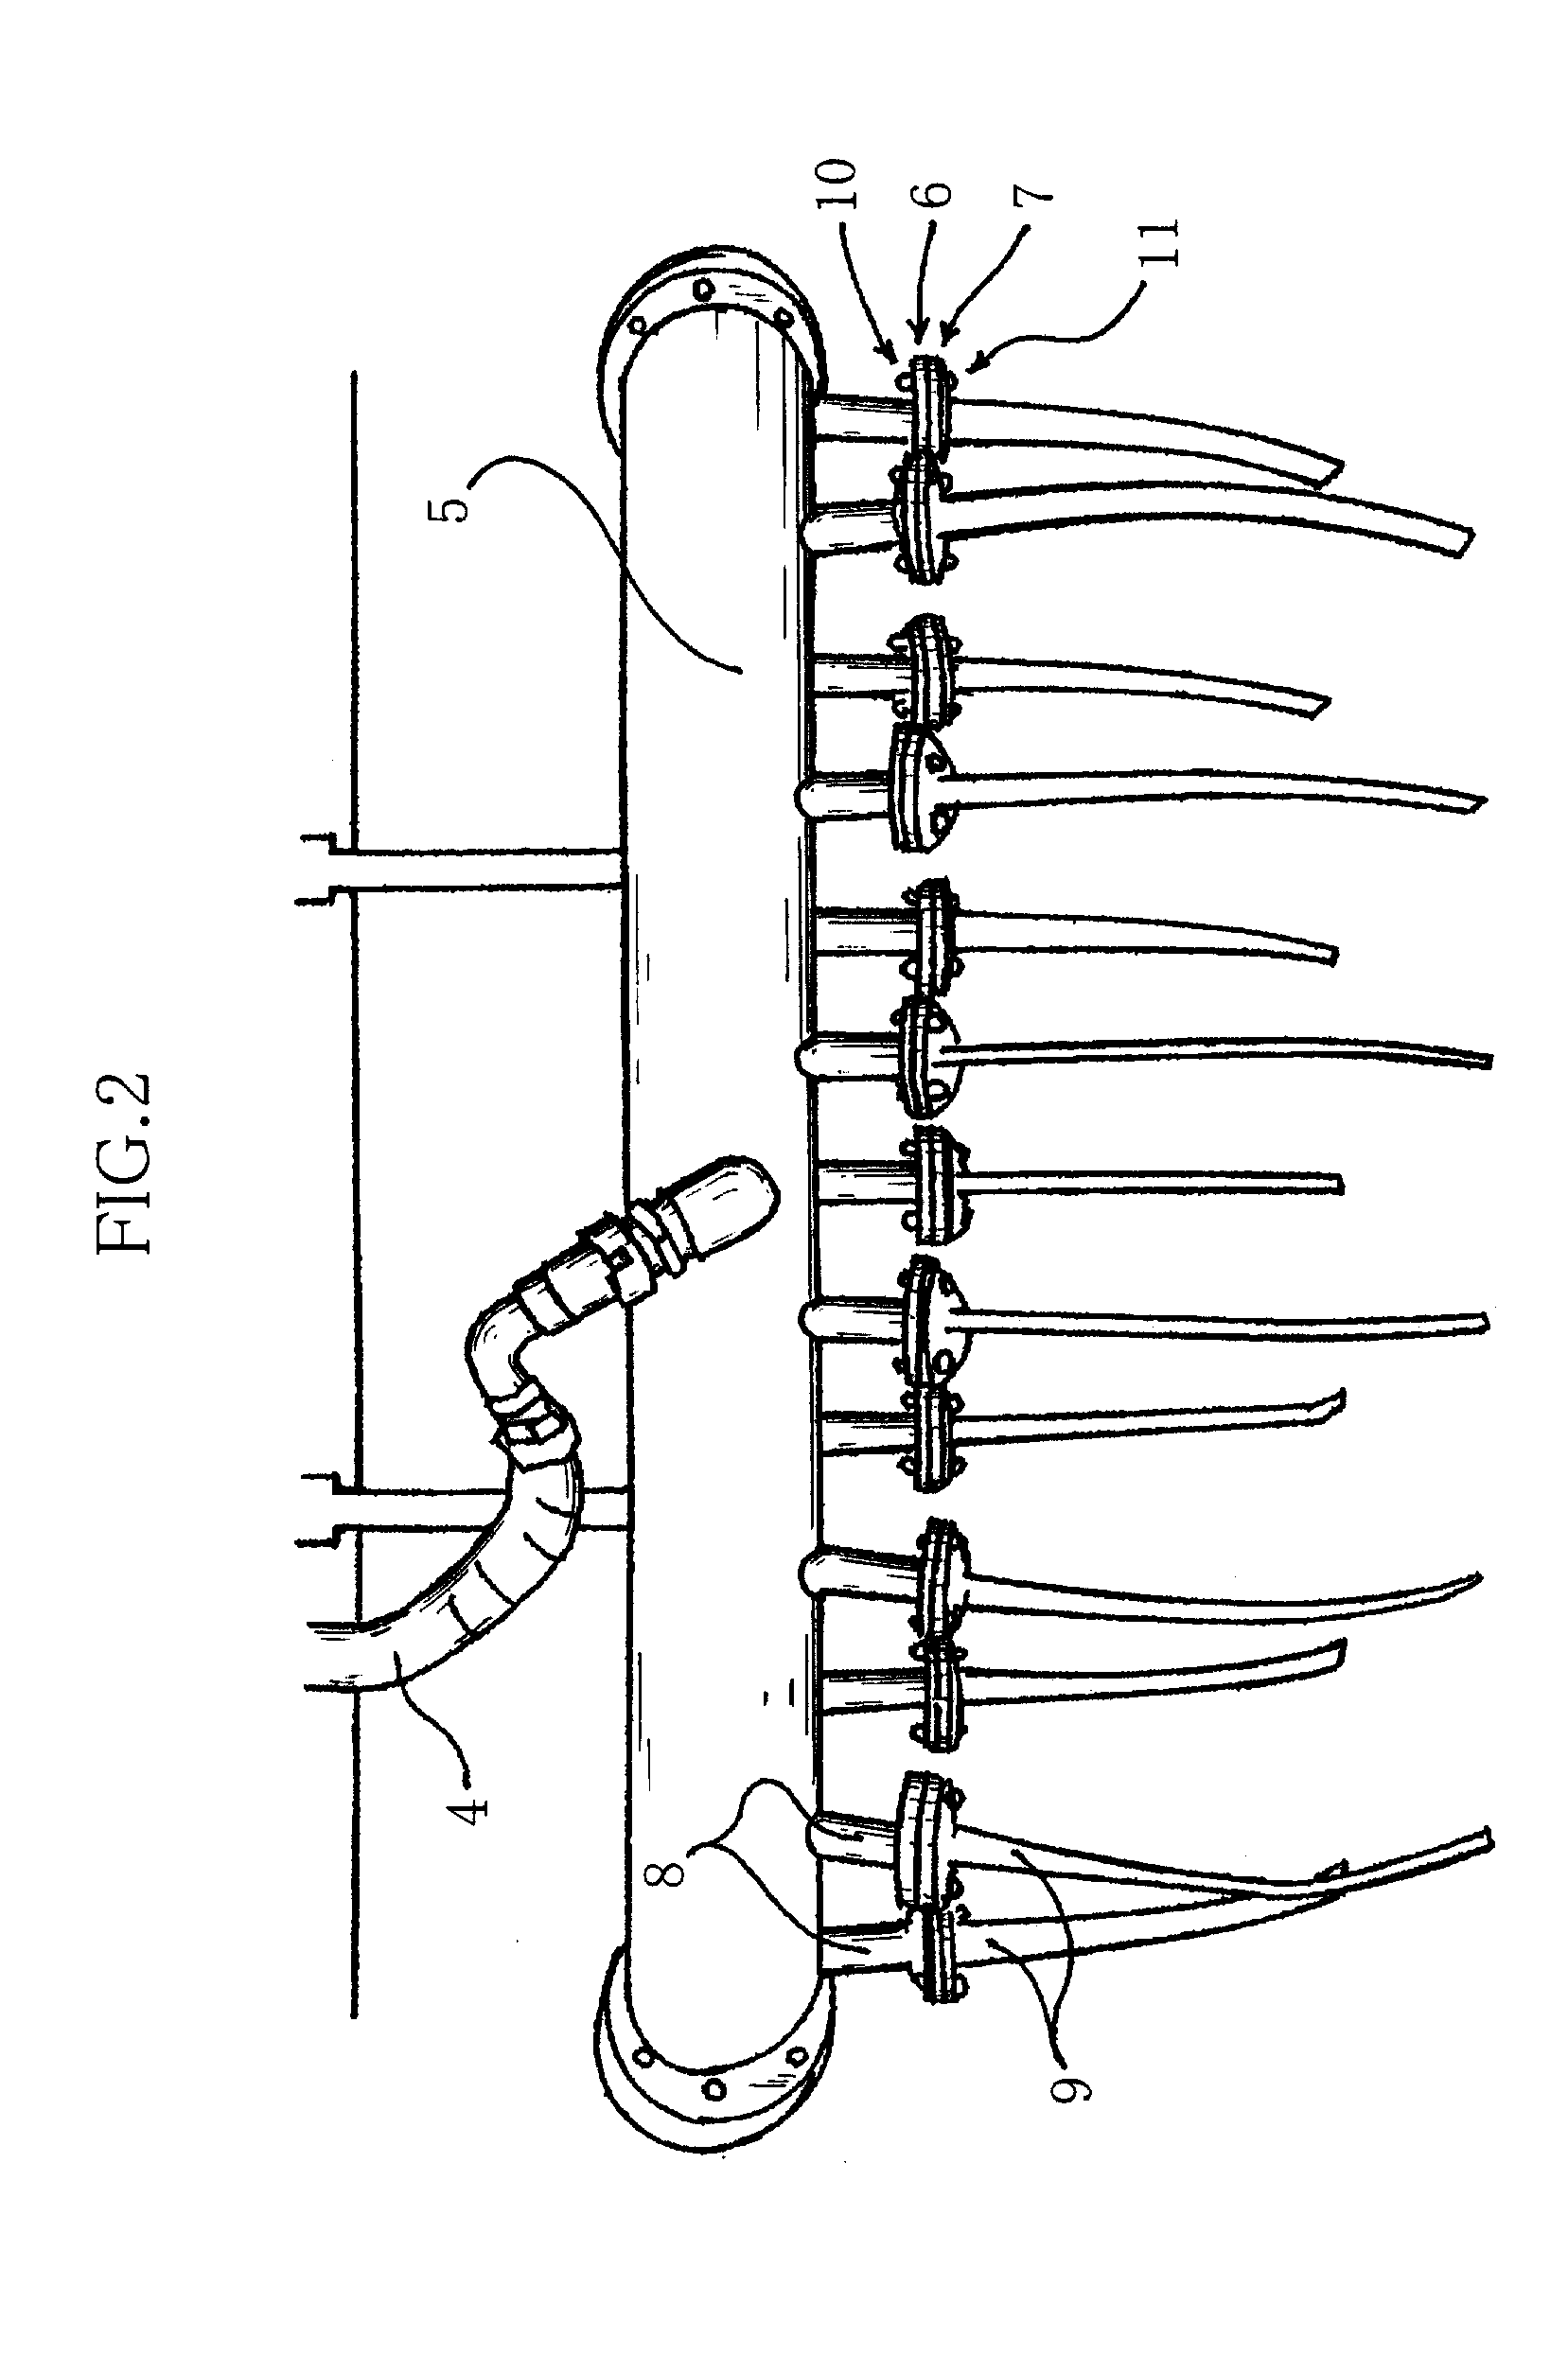 Soil pasteurizing apparatus and method using exhaust gas